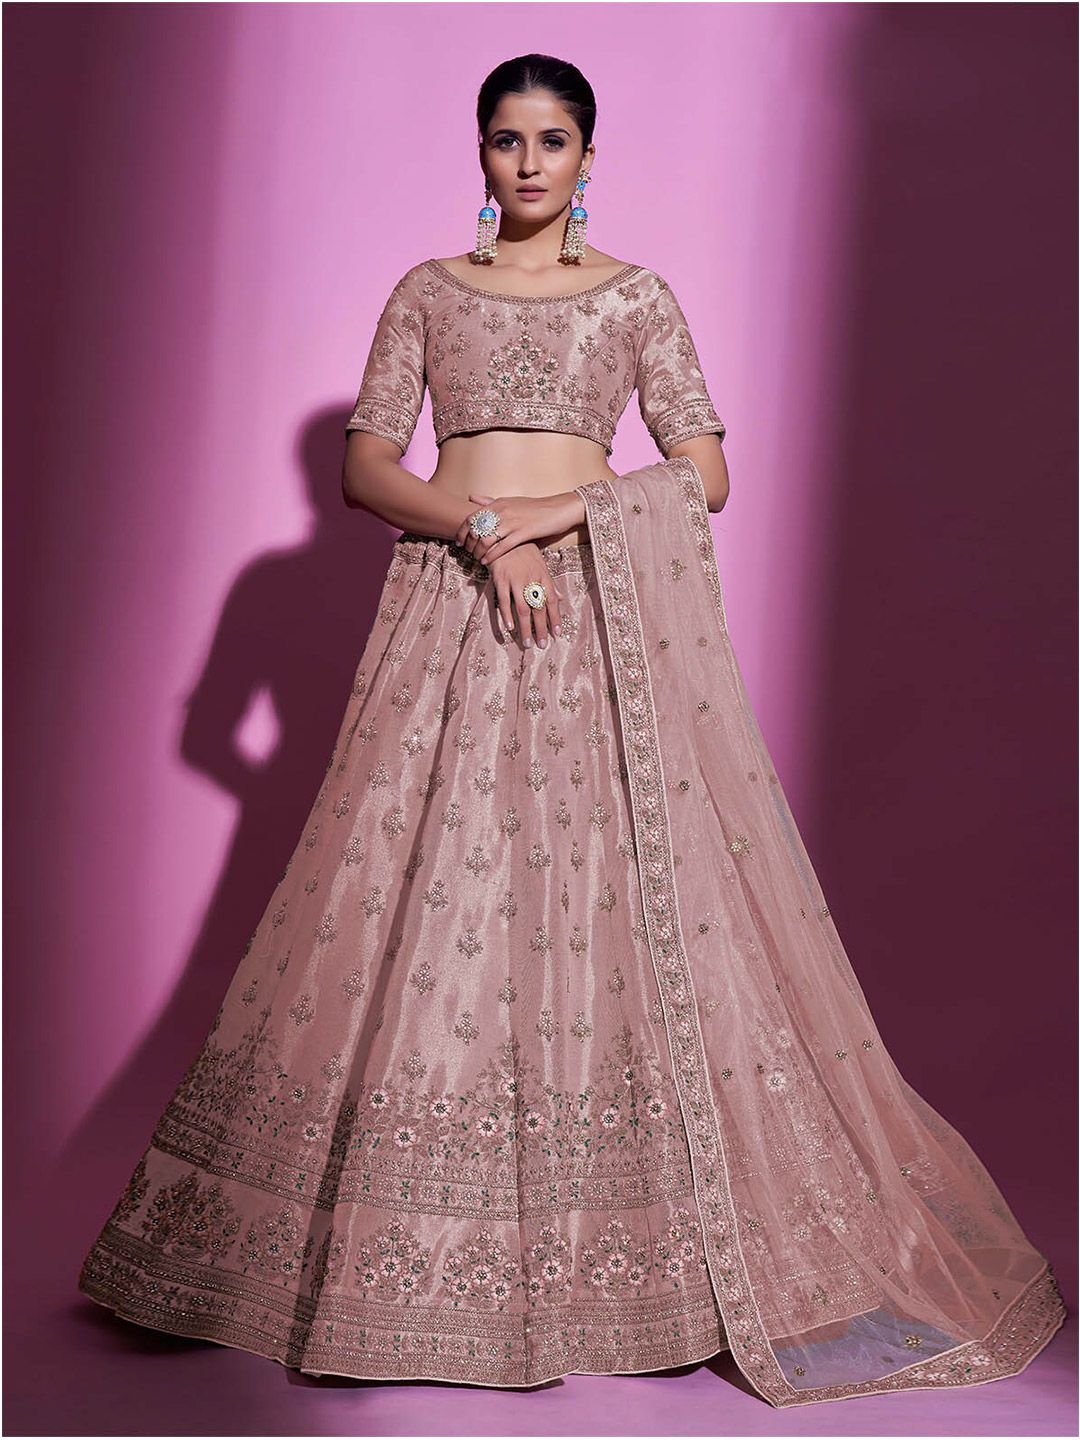 ODETTE Peach-Coloured & Silver-Toned Embroidered Thread Work Semi-Stitched Lehenga & Unstitched Price in India